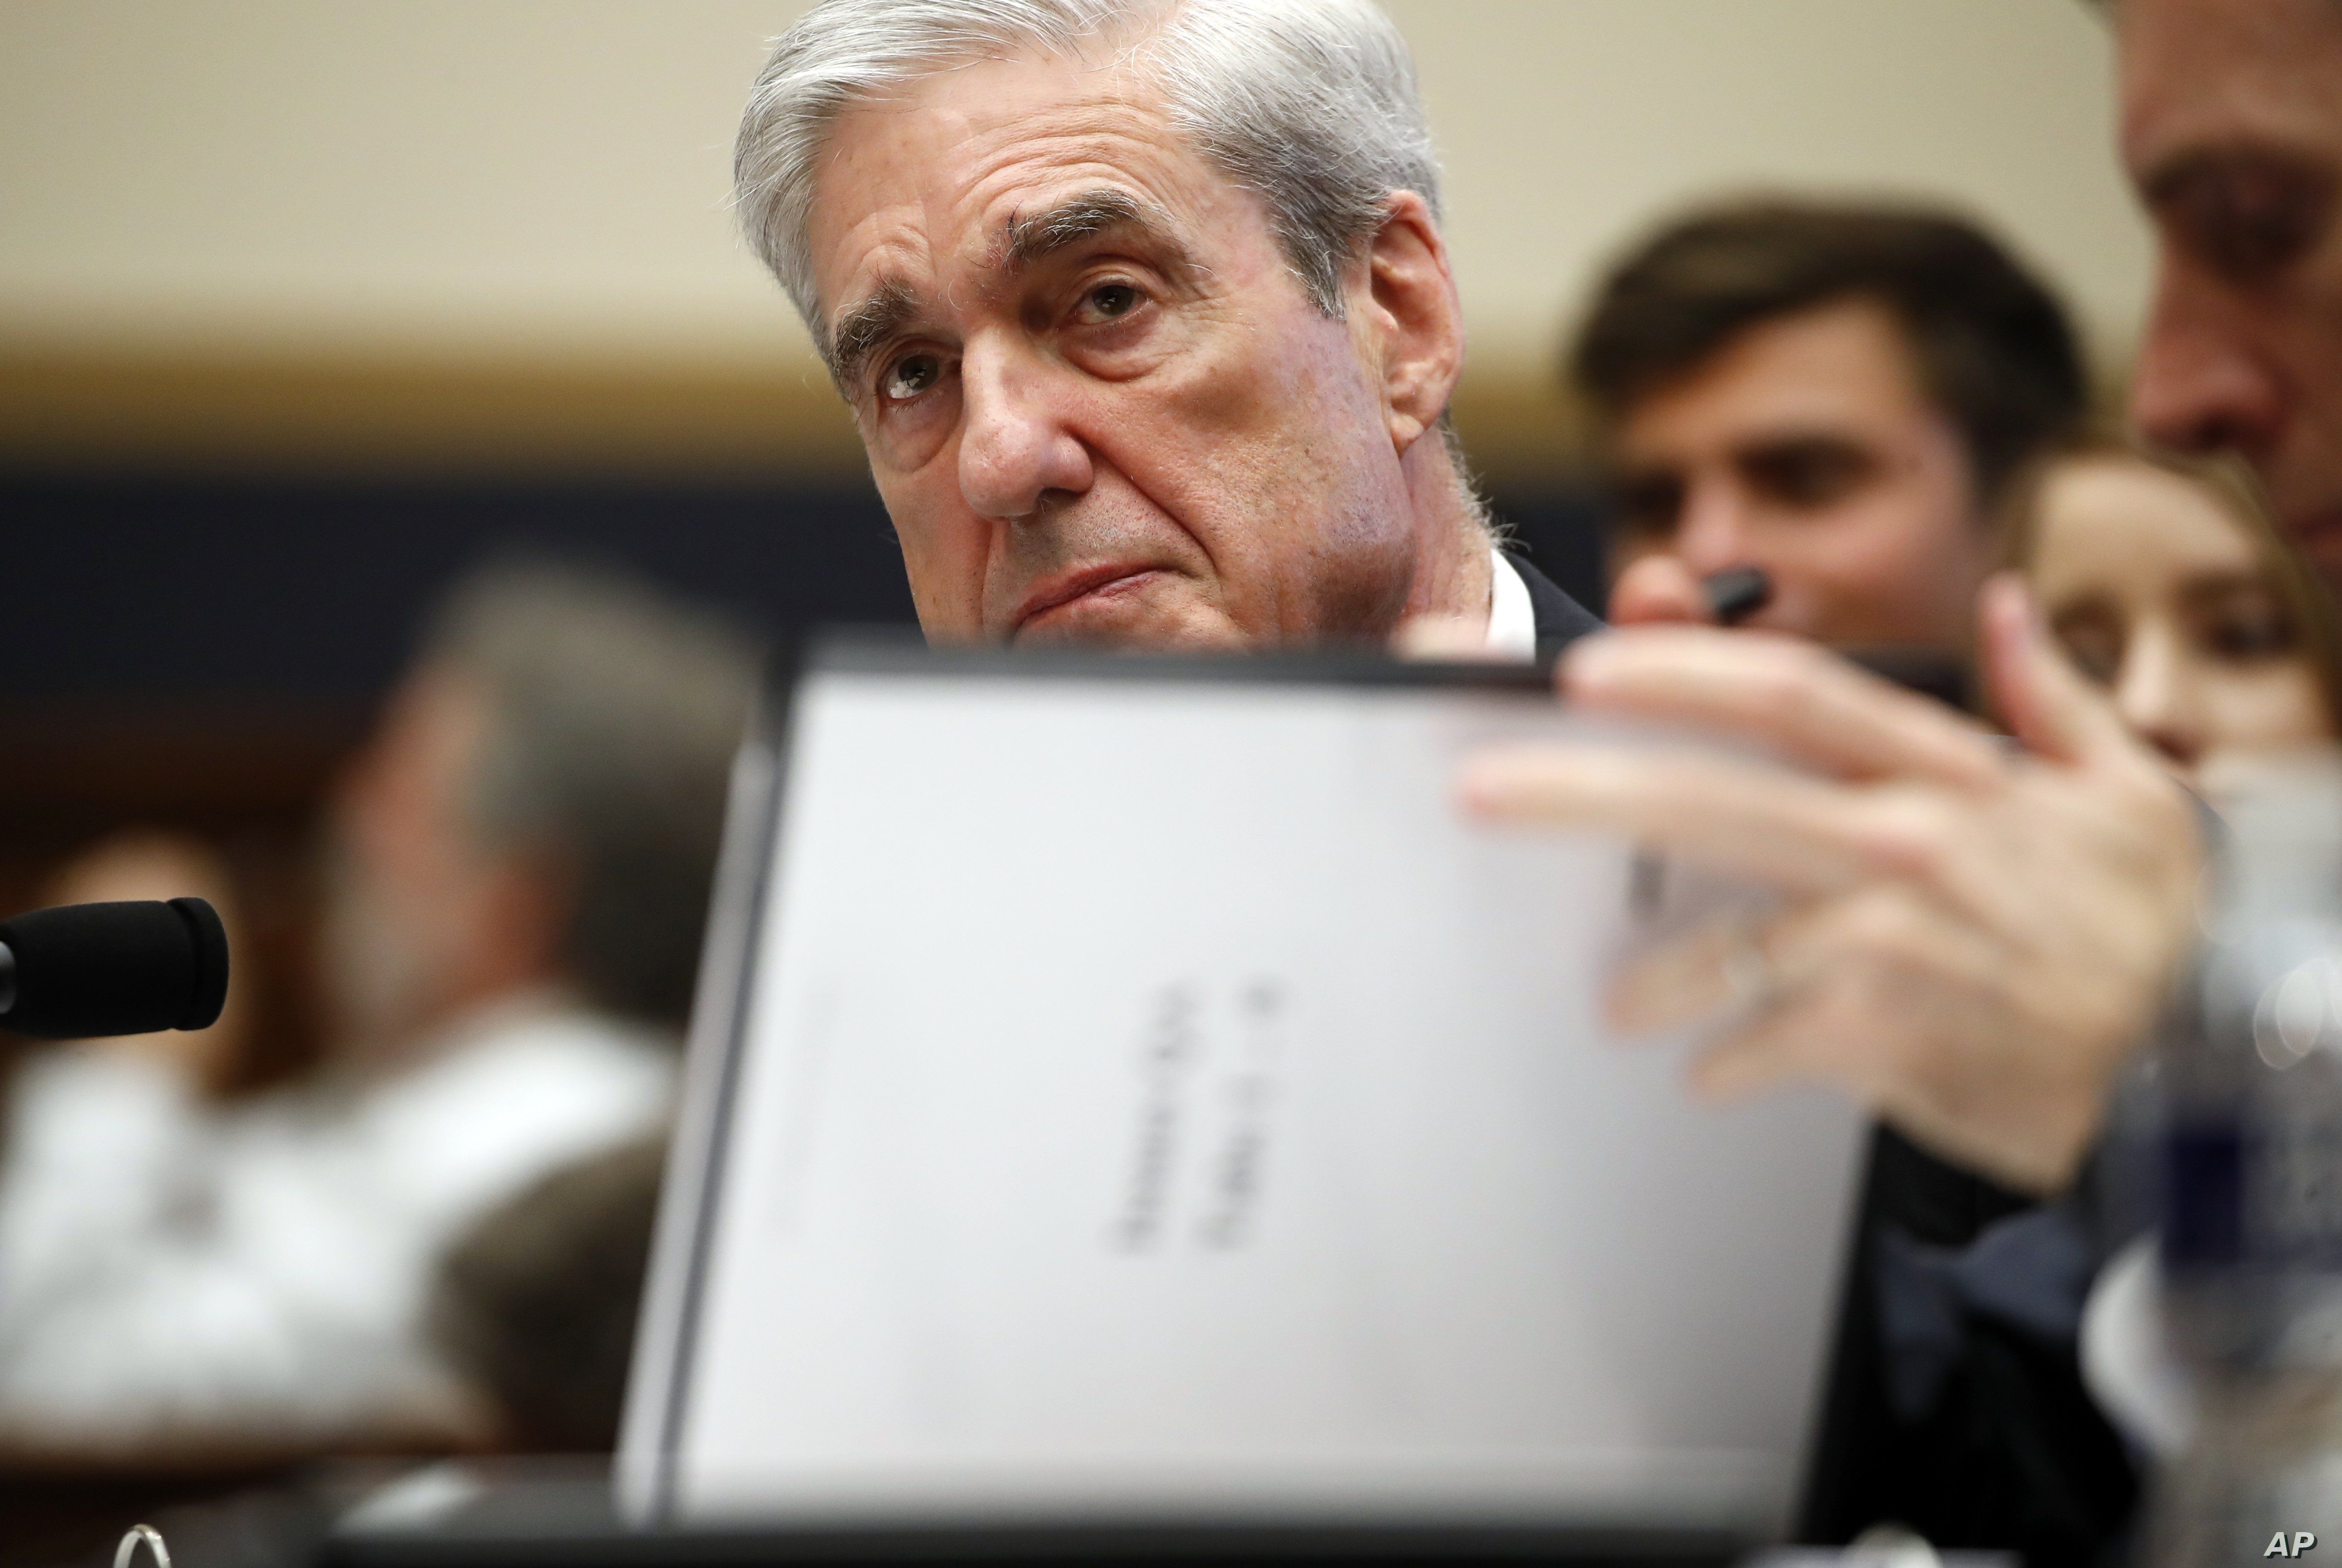 Former special counsel Robert Mueller checks pages in the report as he testifies before the House Judiciary Committee on his report on Russian election interference, Capitol Hill, July 24, 2019 in Washington.